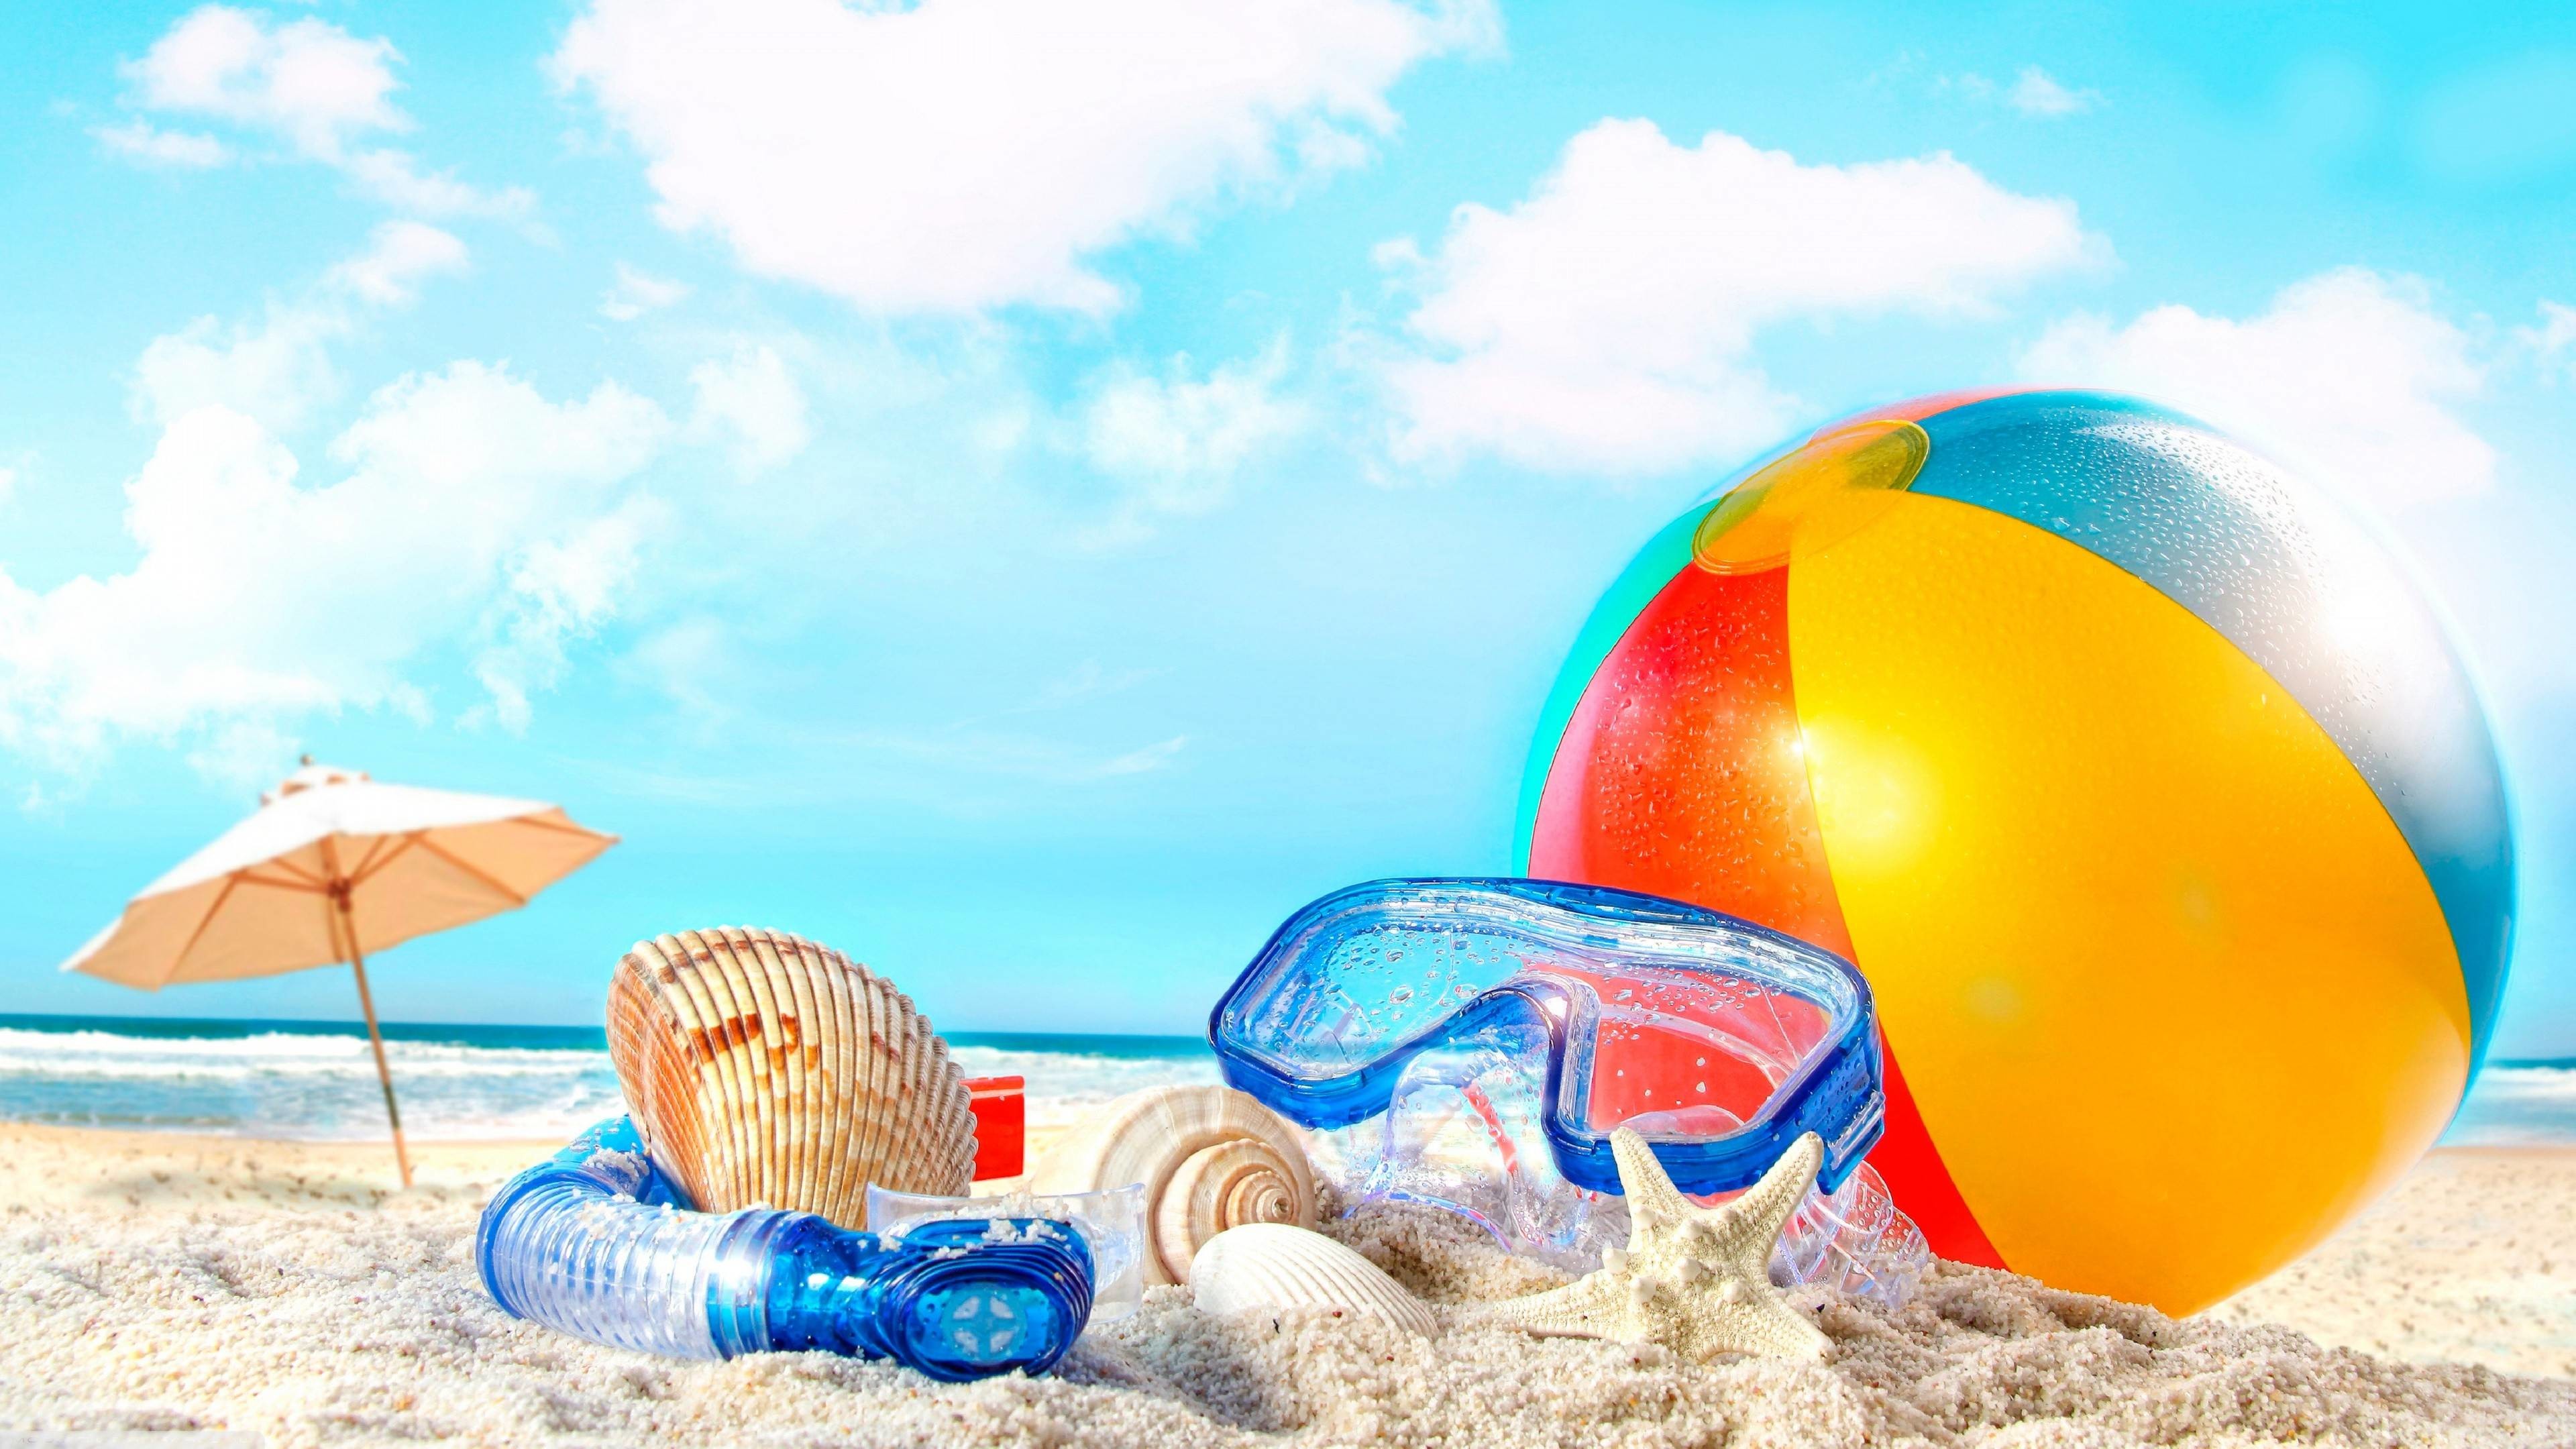 3840x2160 Summer Holliday in the Beach Wallpaper 1080p Free Download.